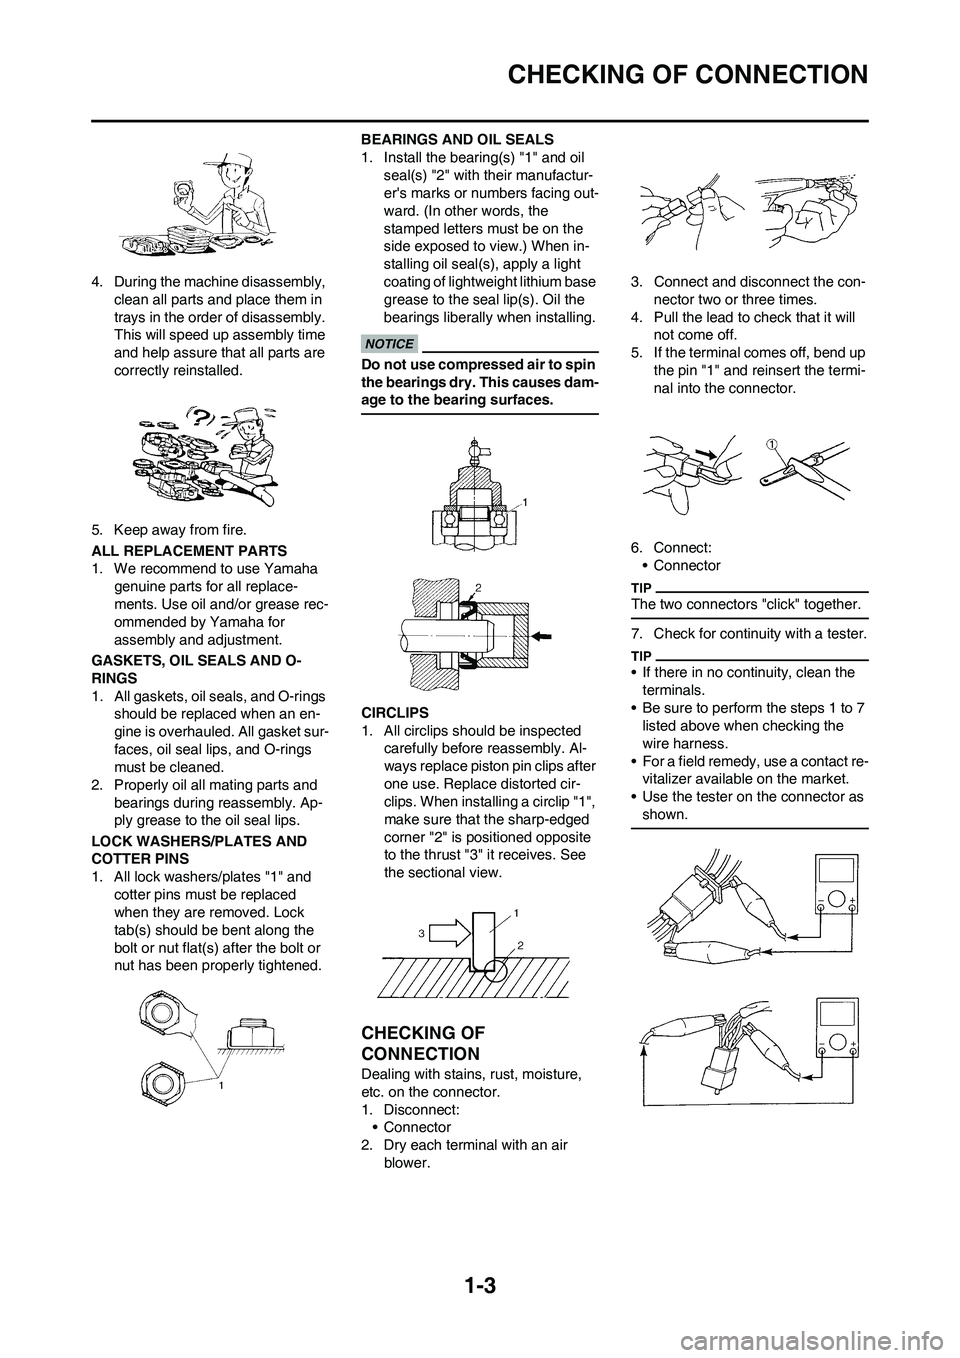 YAMAHA YZ450F 2009 User Guide 1-3
CHECKING OF CONNECTION
4. During the machine disassembly, 
clean all parts and place them in 
trays in the order of disassembly. 
This will speed up assembly time 
and help assure that all parts a